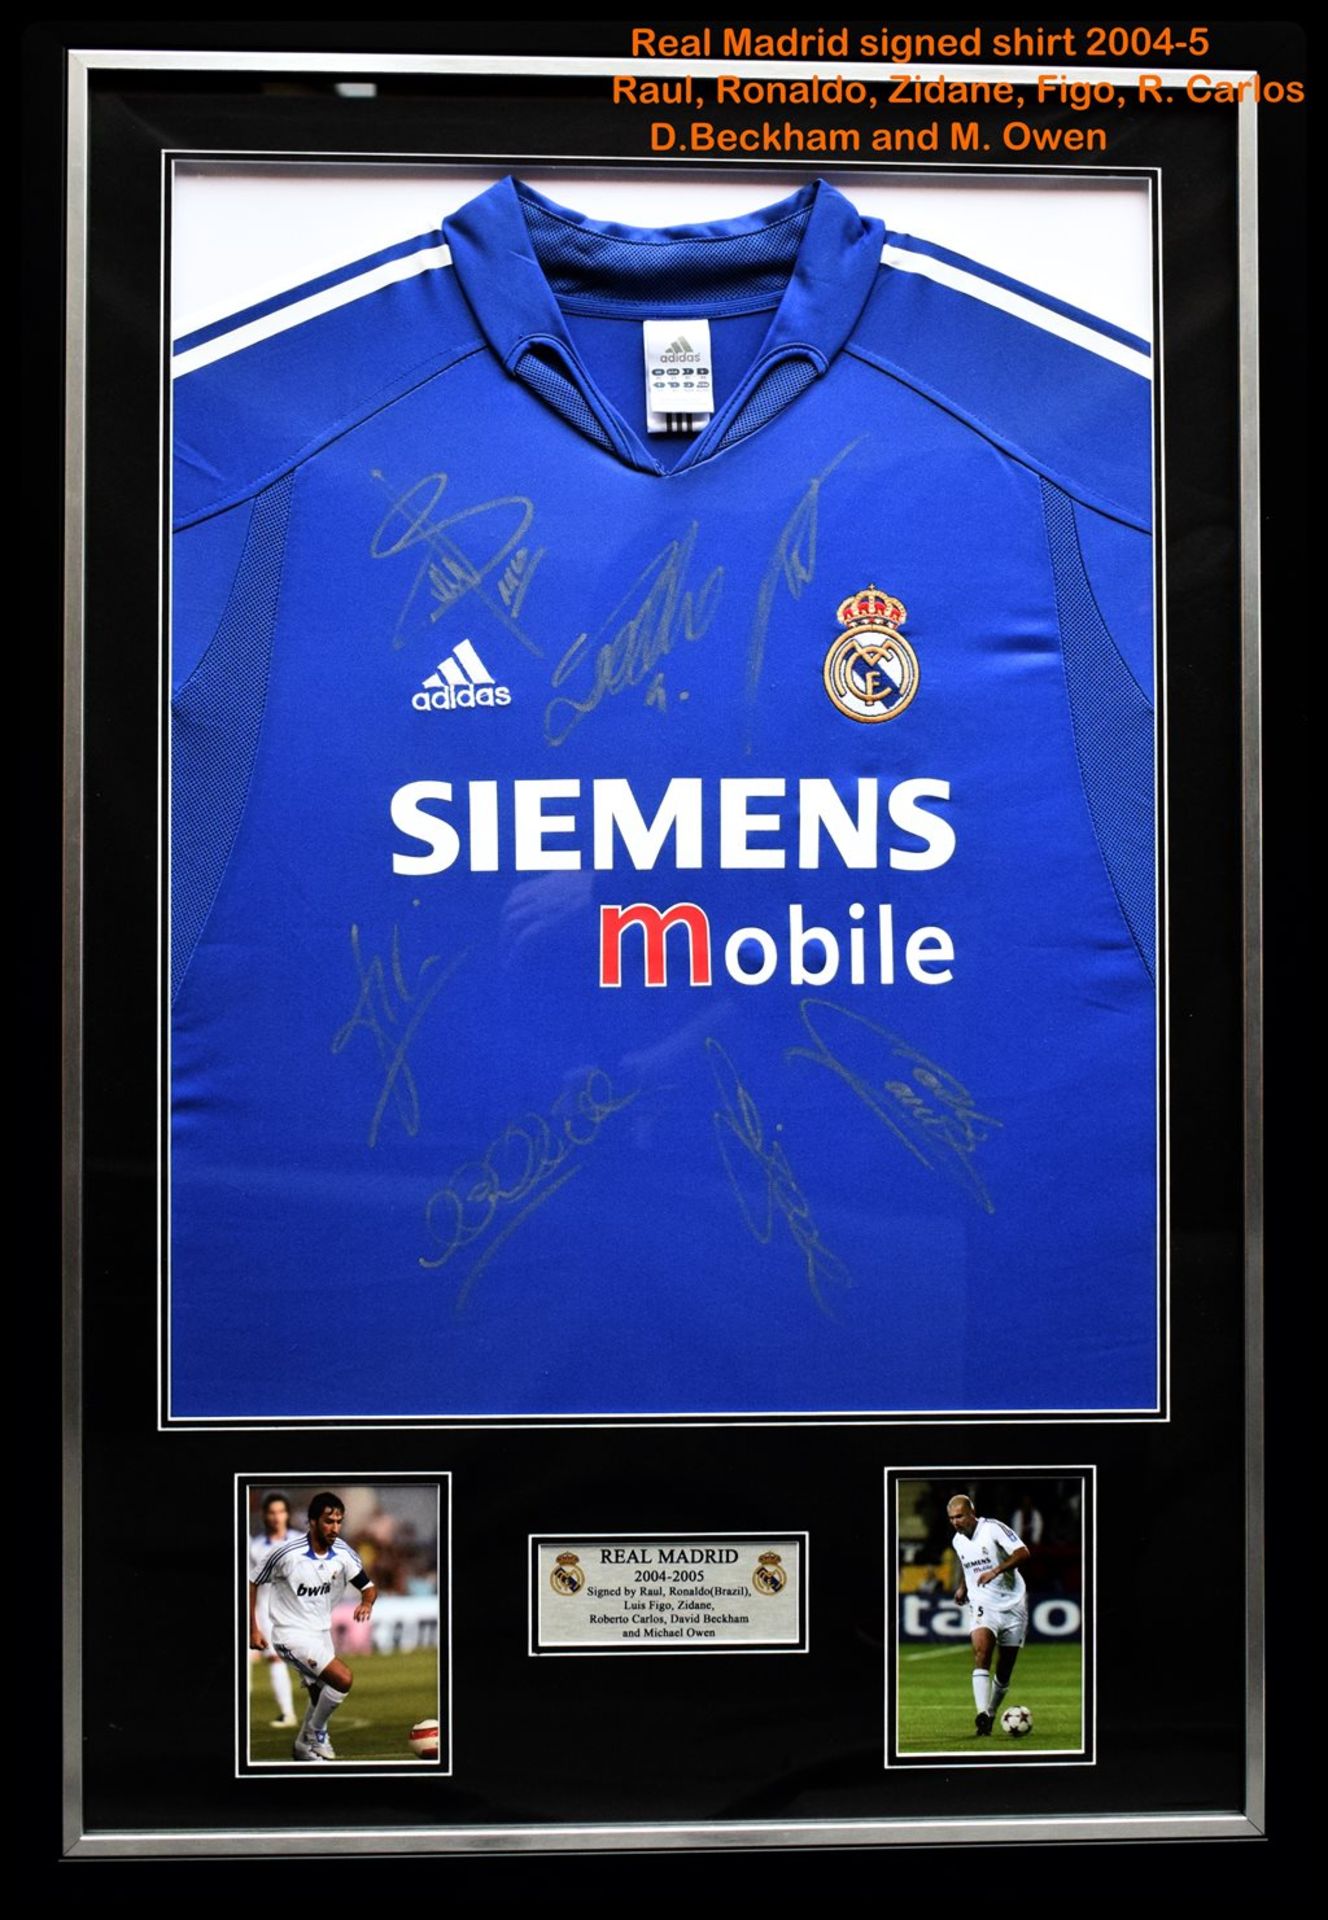 Real Madrid Shirt Signed By Galacticos of 2004